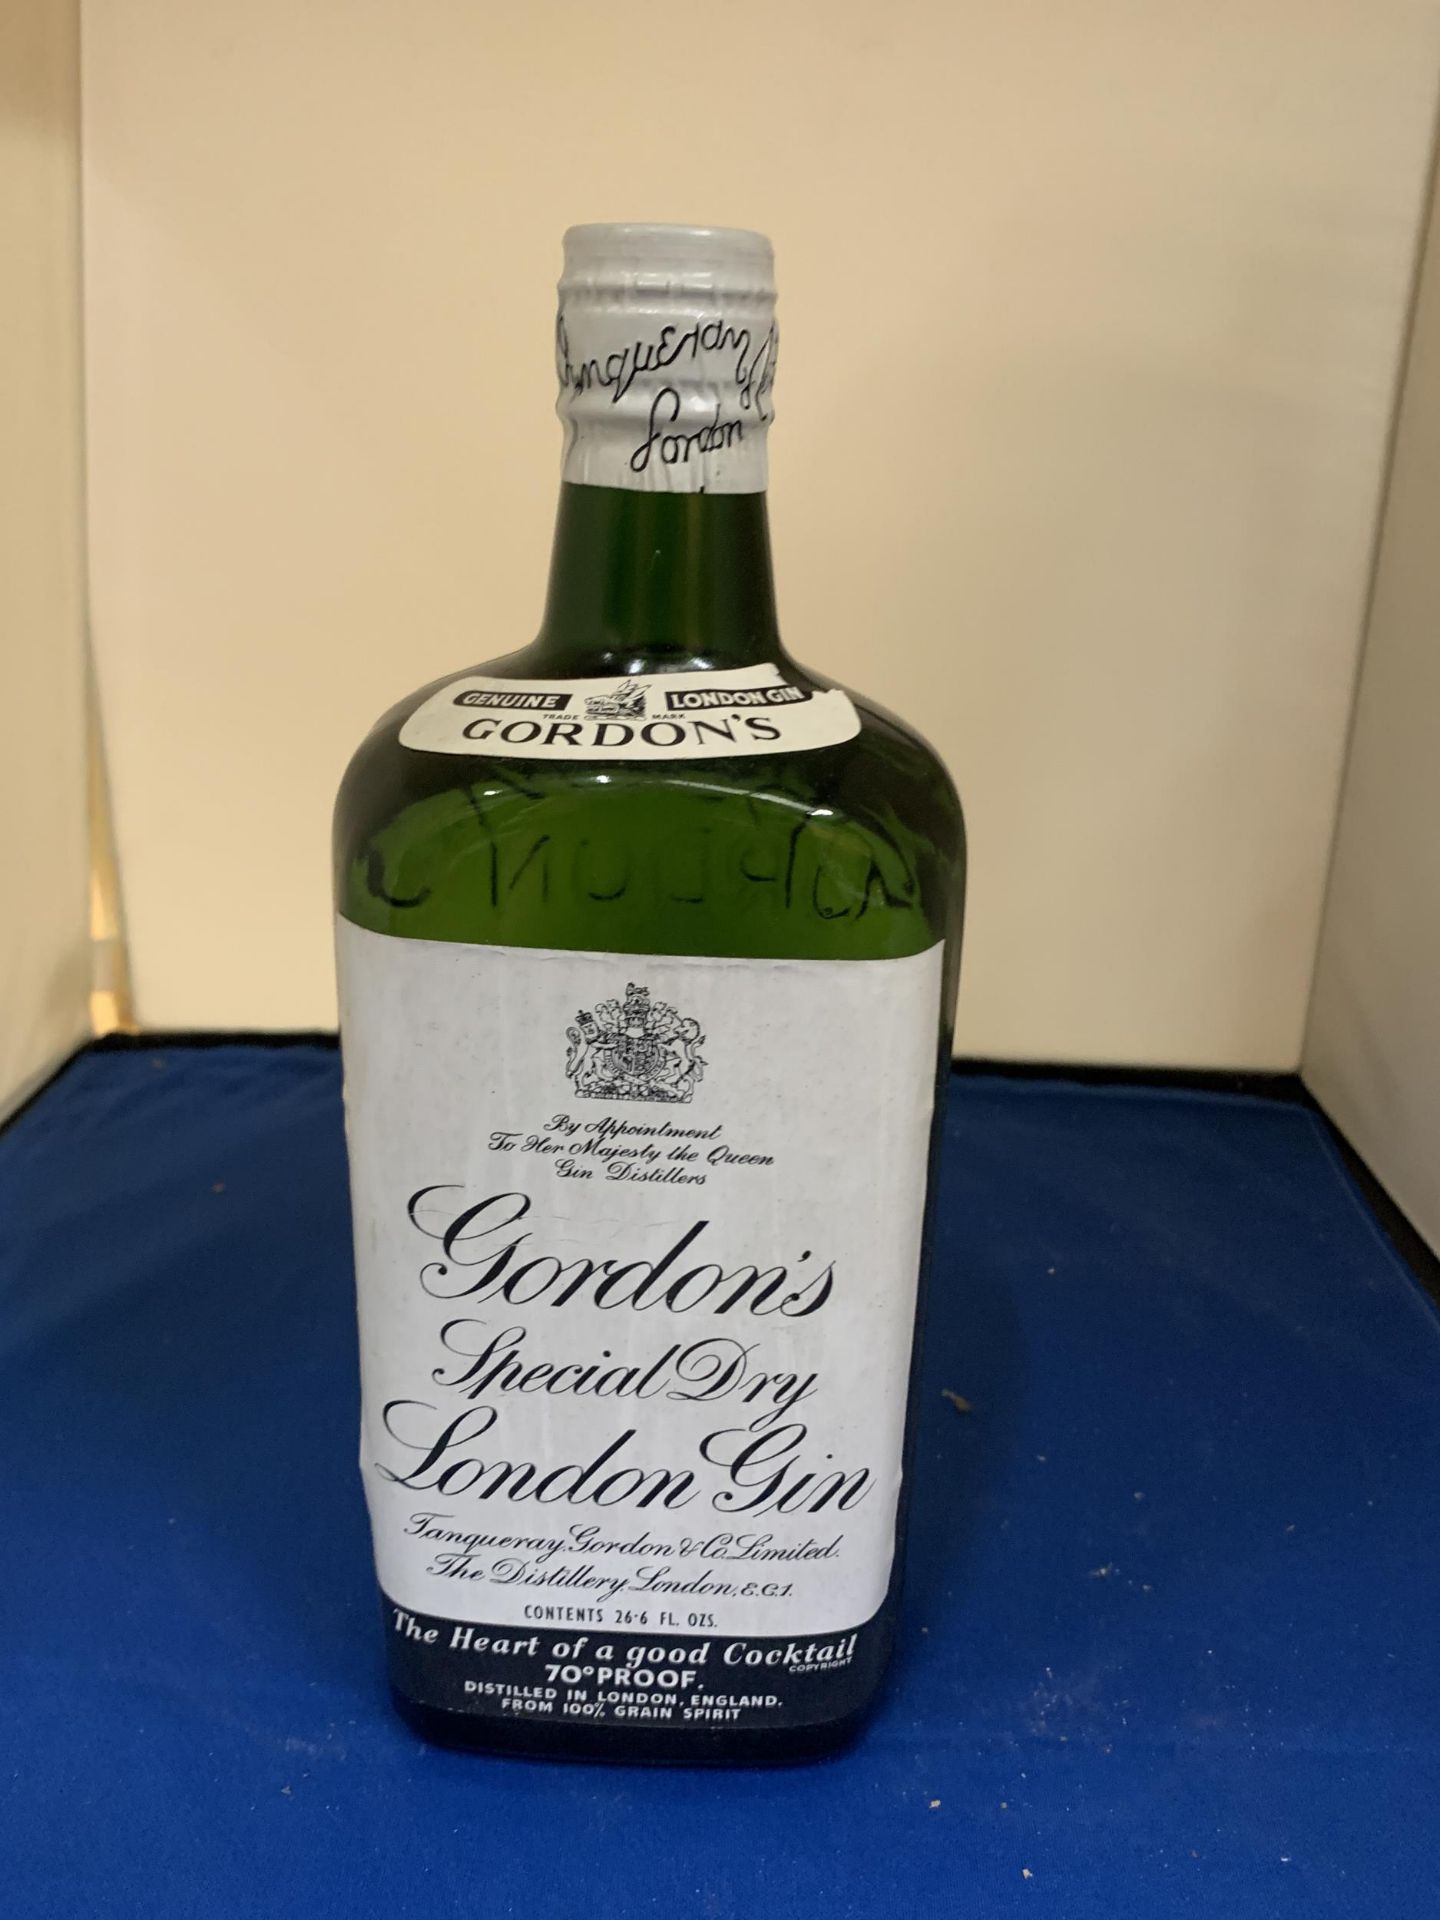 A BOTTLE OF GORDONS SPECIAL DRY LONDON GIN 70% PROOF